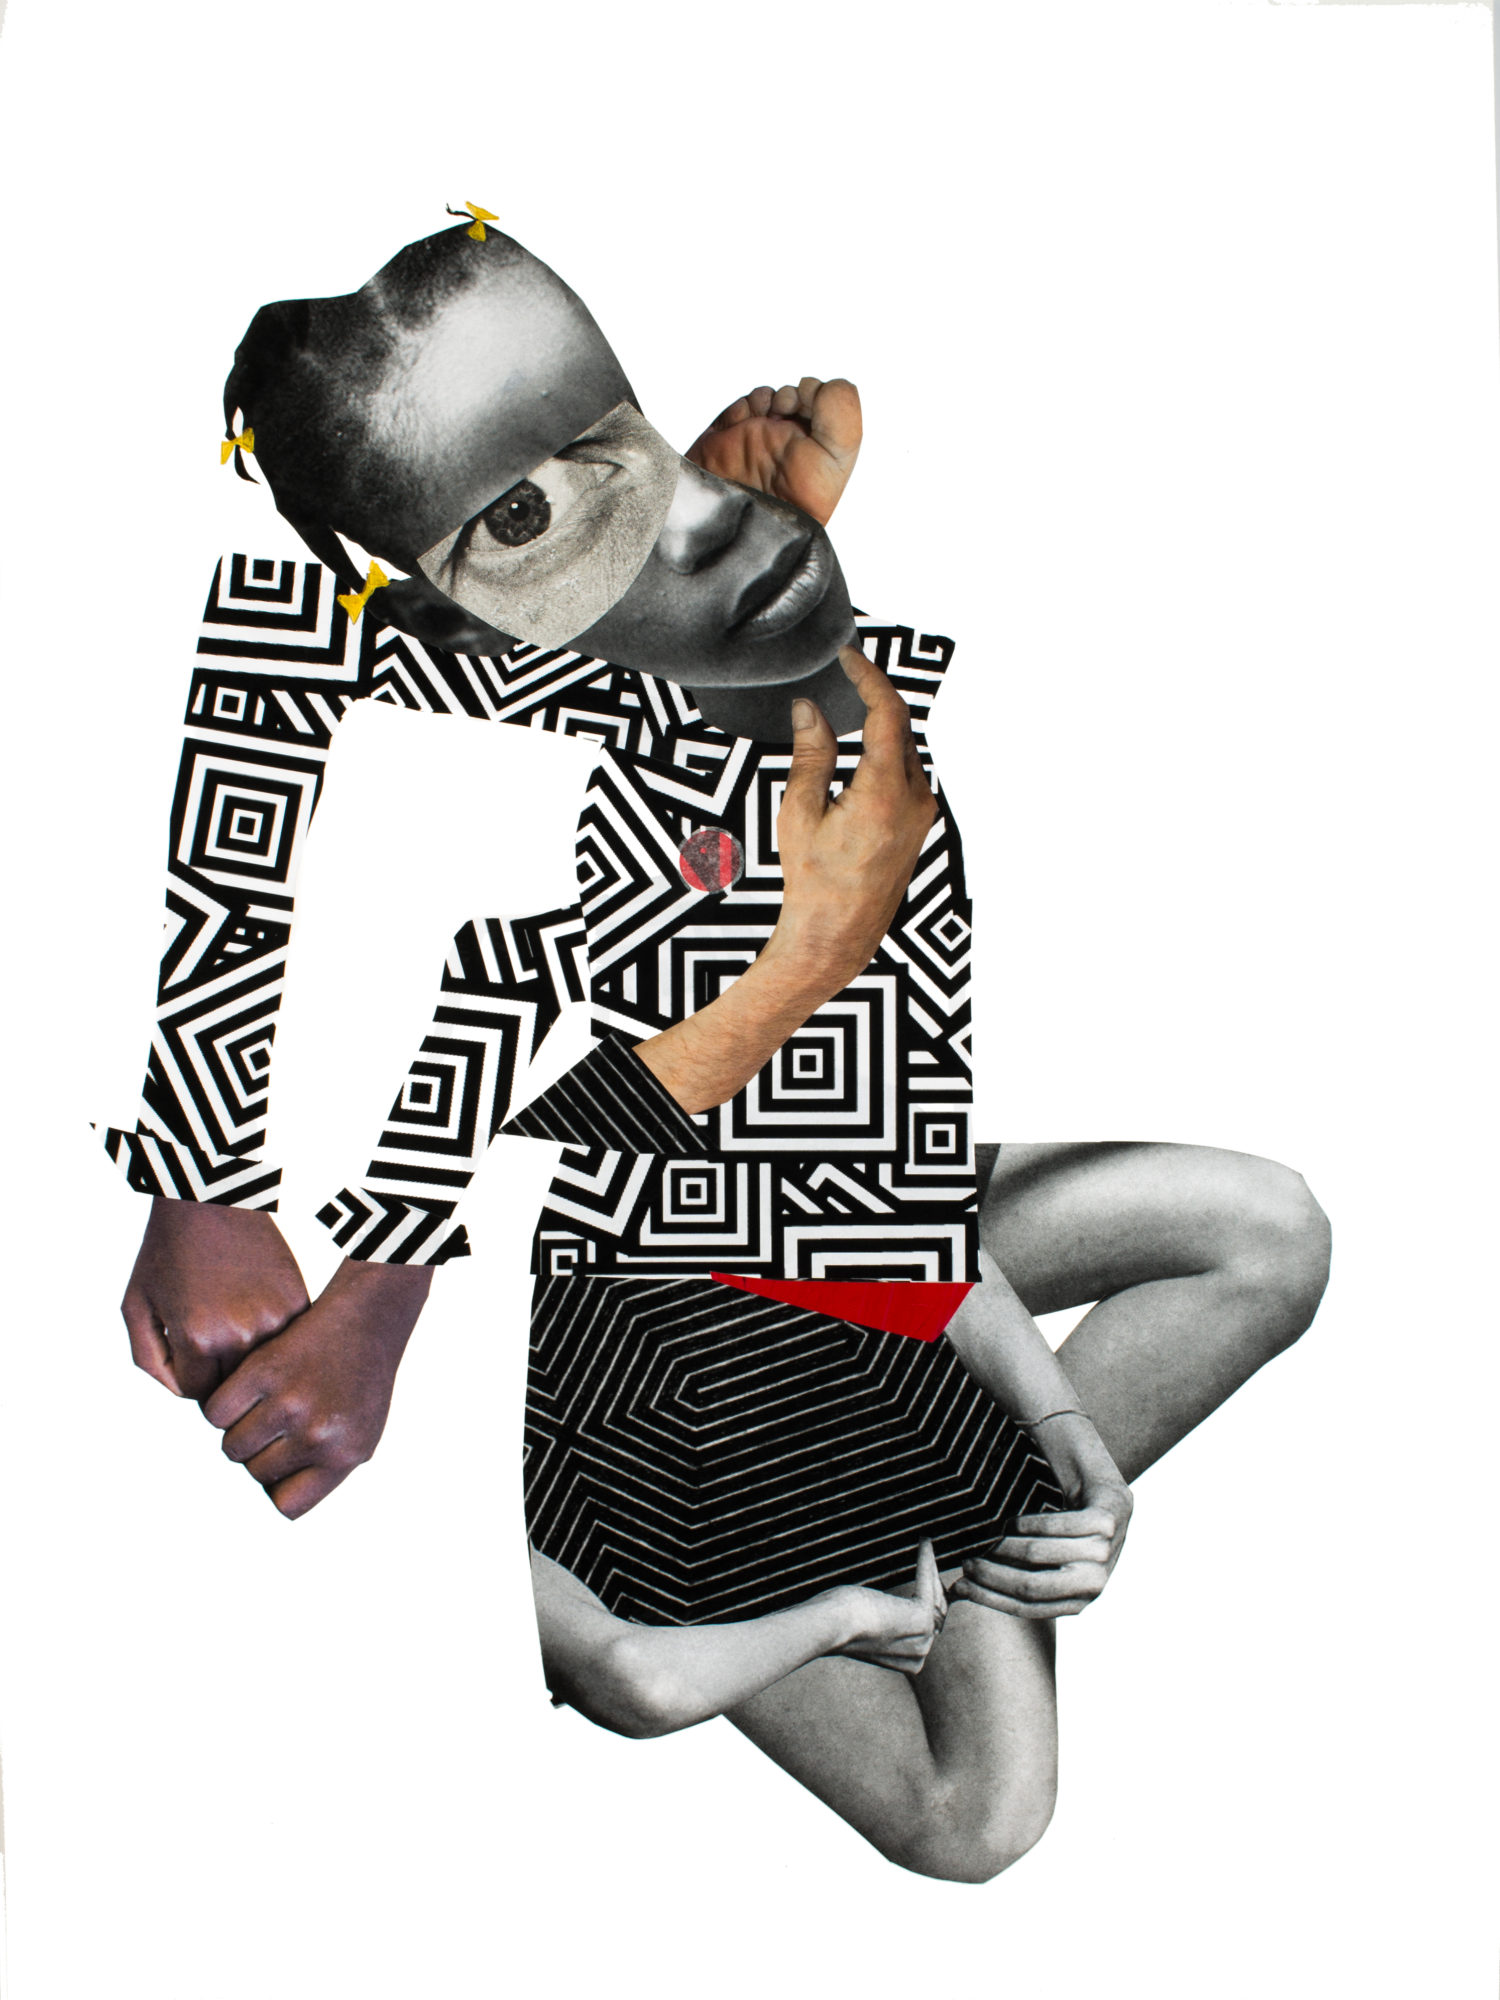 Composite image by Deborah Roberts on a white background featuring several combined photographs of different body parts (mostly arms and legs) to form a portrait of a girl wearing a shirt with a square black and white geometric pattern and yellow barrettes